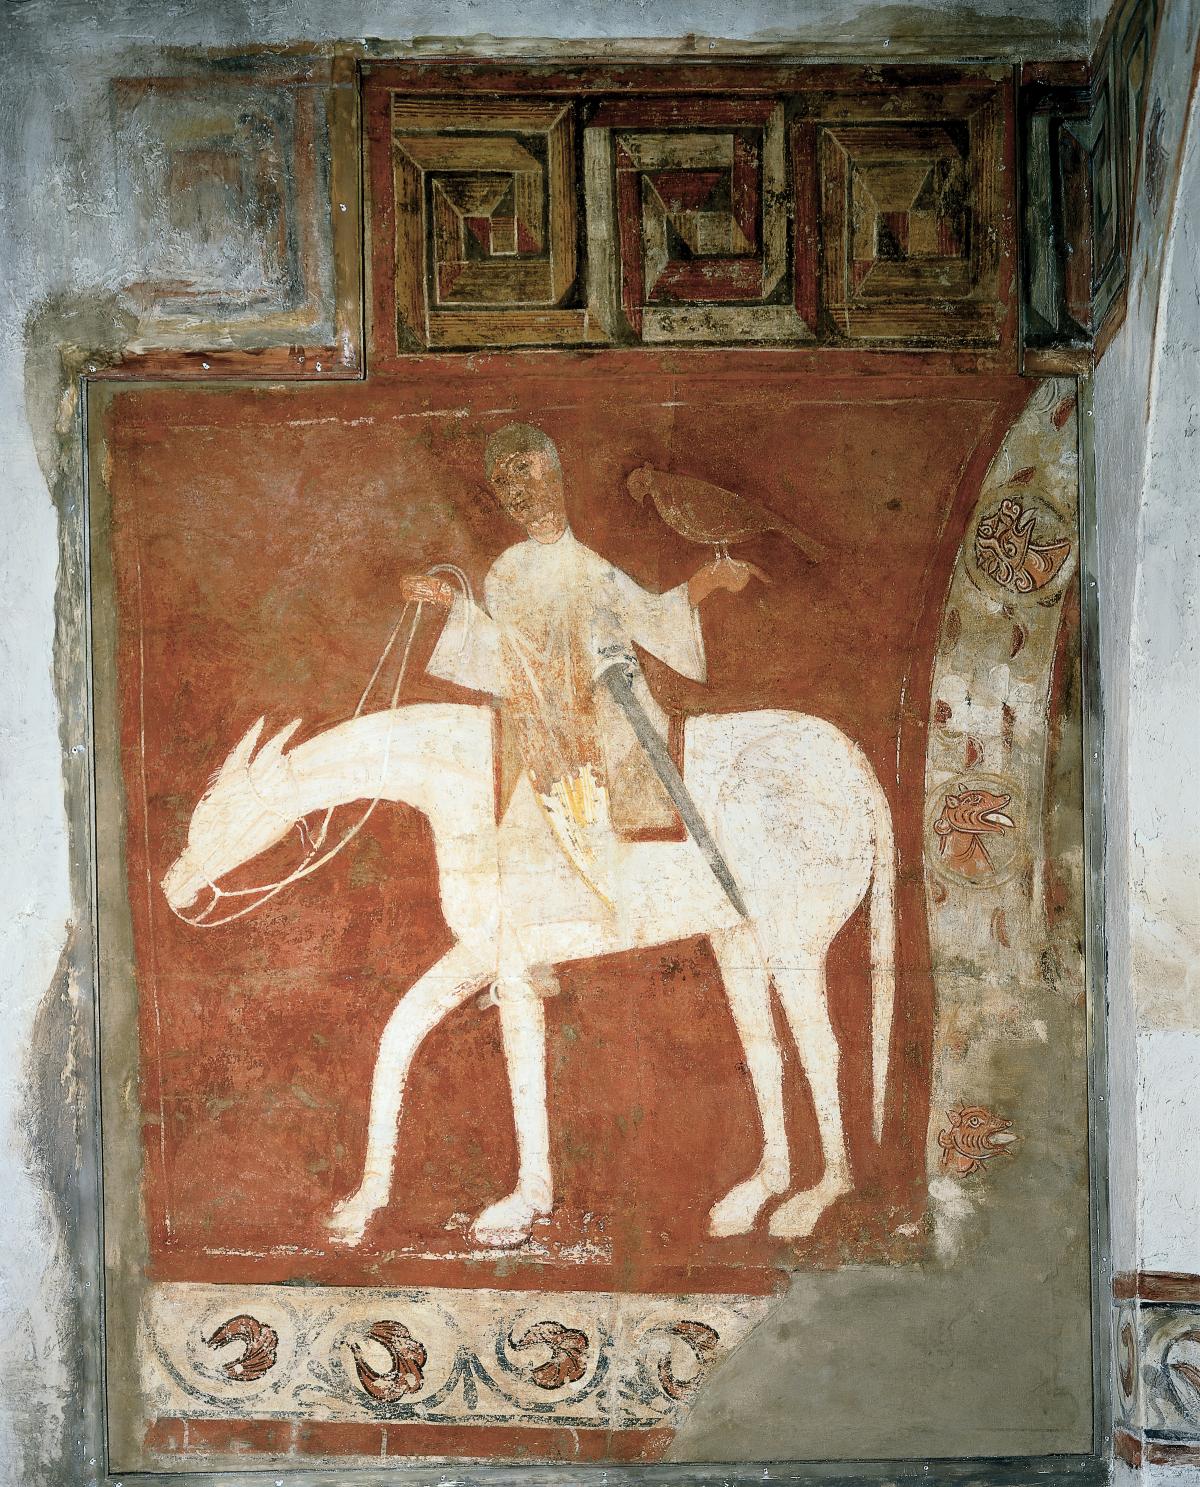 Falconer riding a white horse, with a brown falcon perched on his arm and a sword on his hip